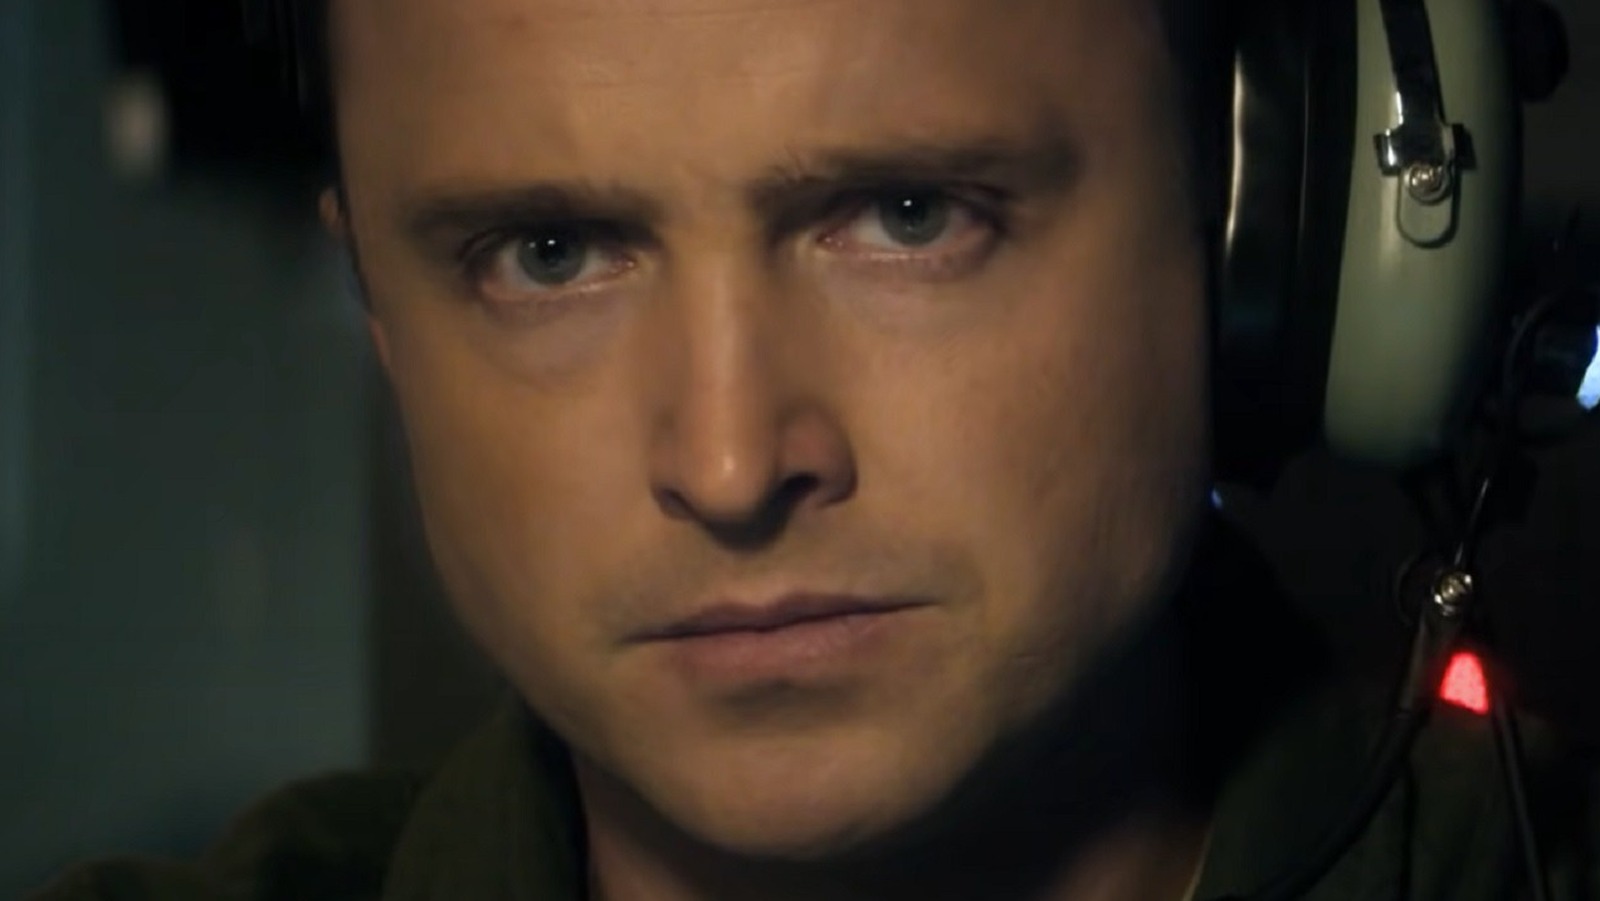 15 Most Memorable Aaron Paul Roles Ranked From Worst To Best